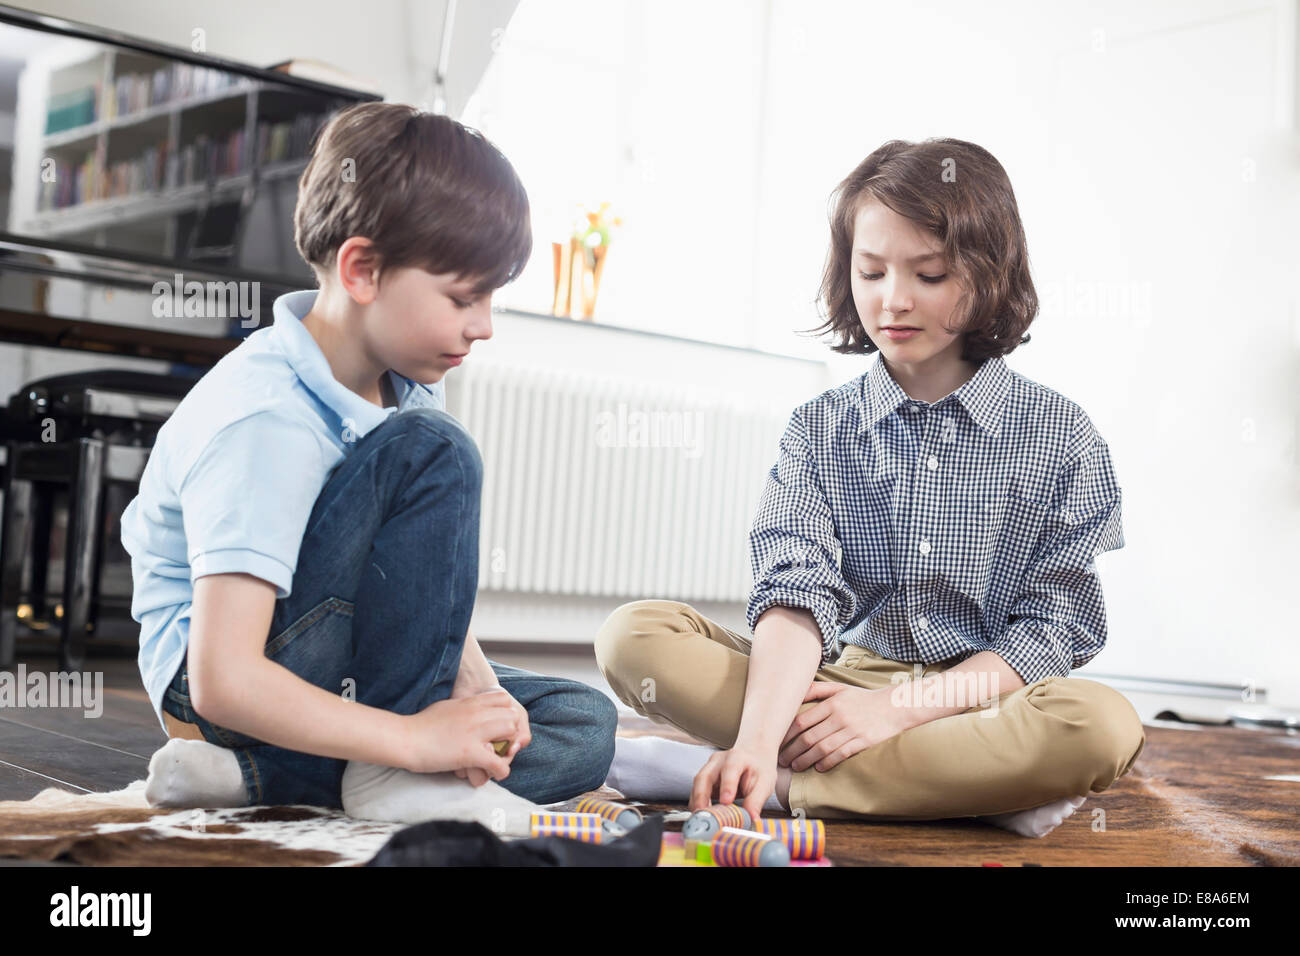 Girl and boy playing board game Stock Photo